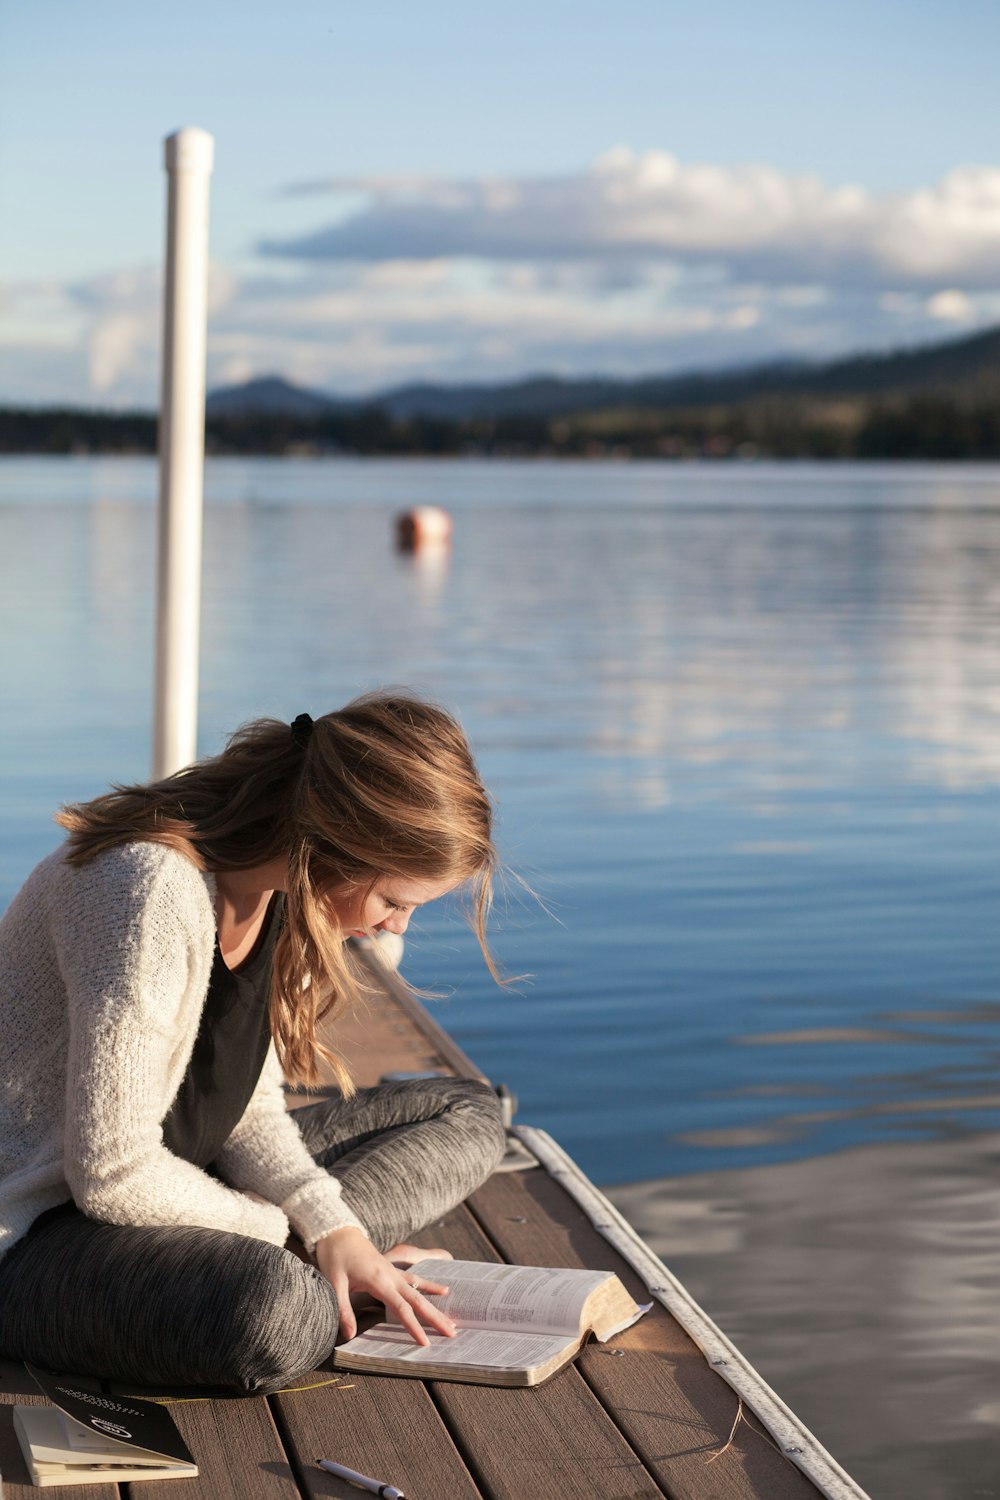 photo of woman reading book near body of water